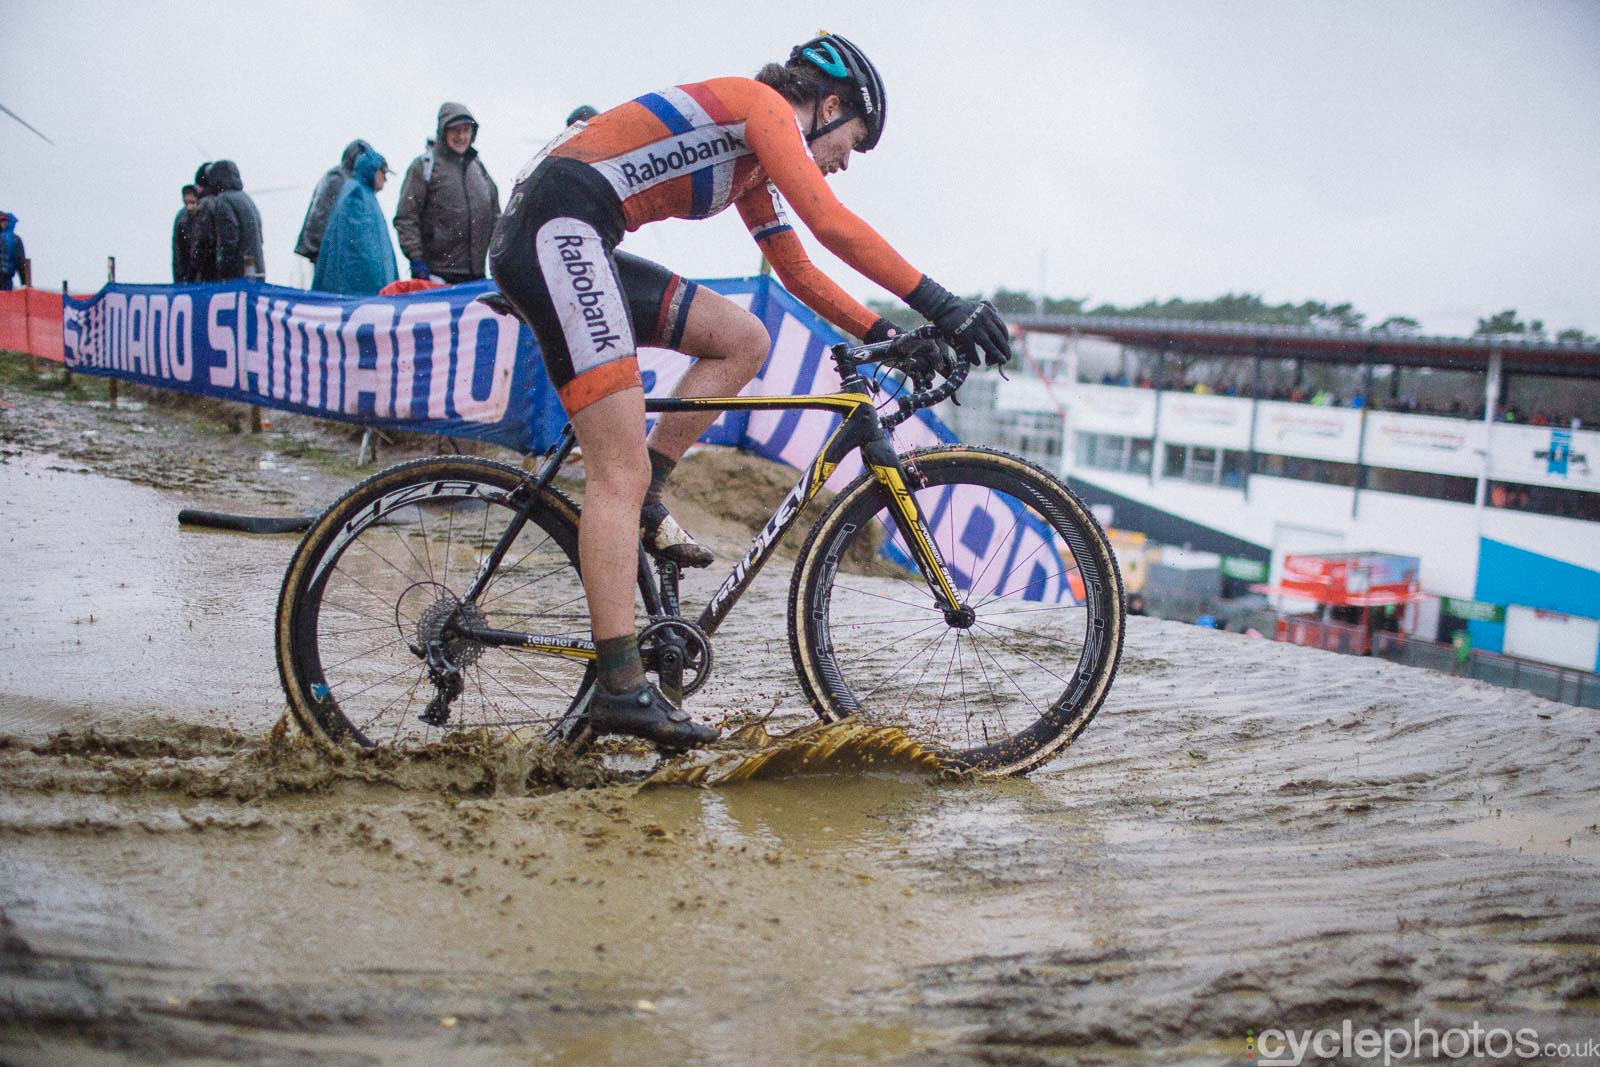 2016-cyclephotos-cyclocross-world-championships-zolder-132128-fleur-nagengast